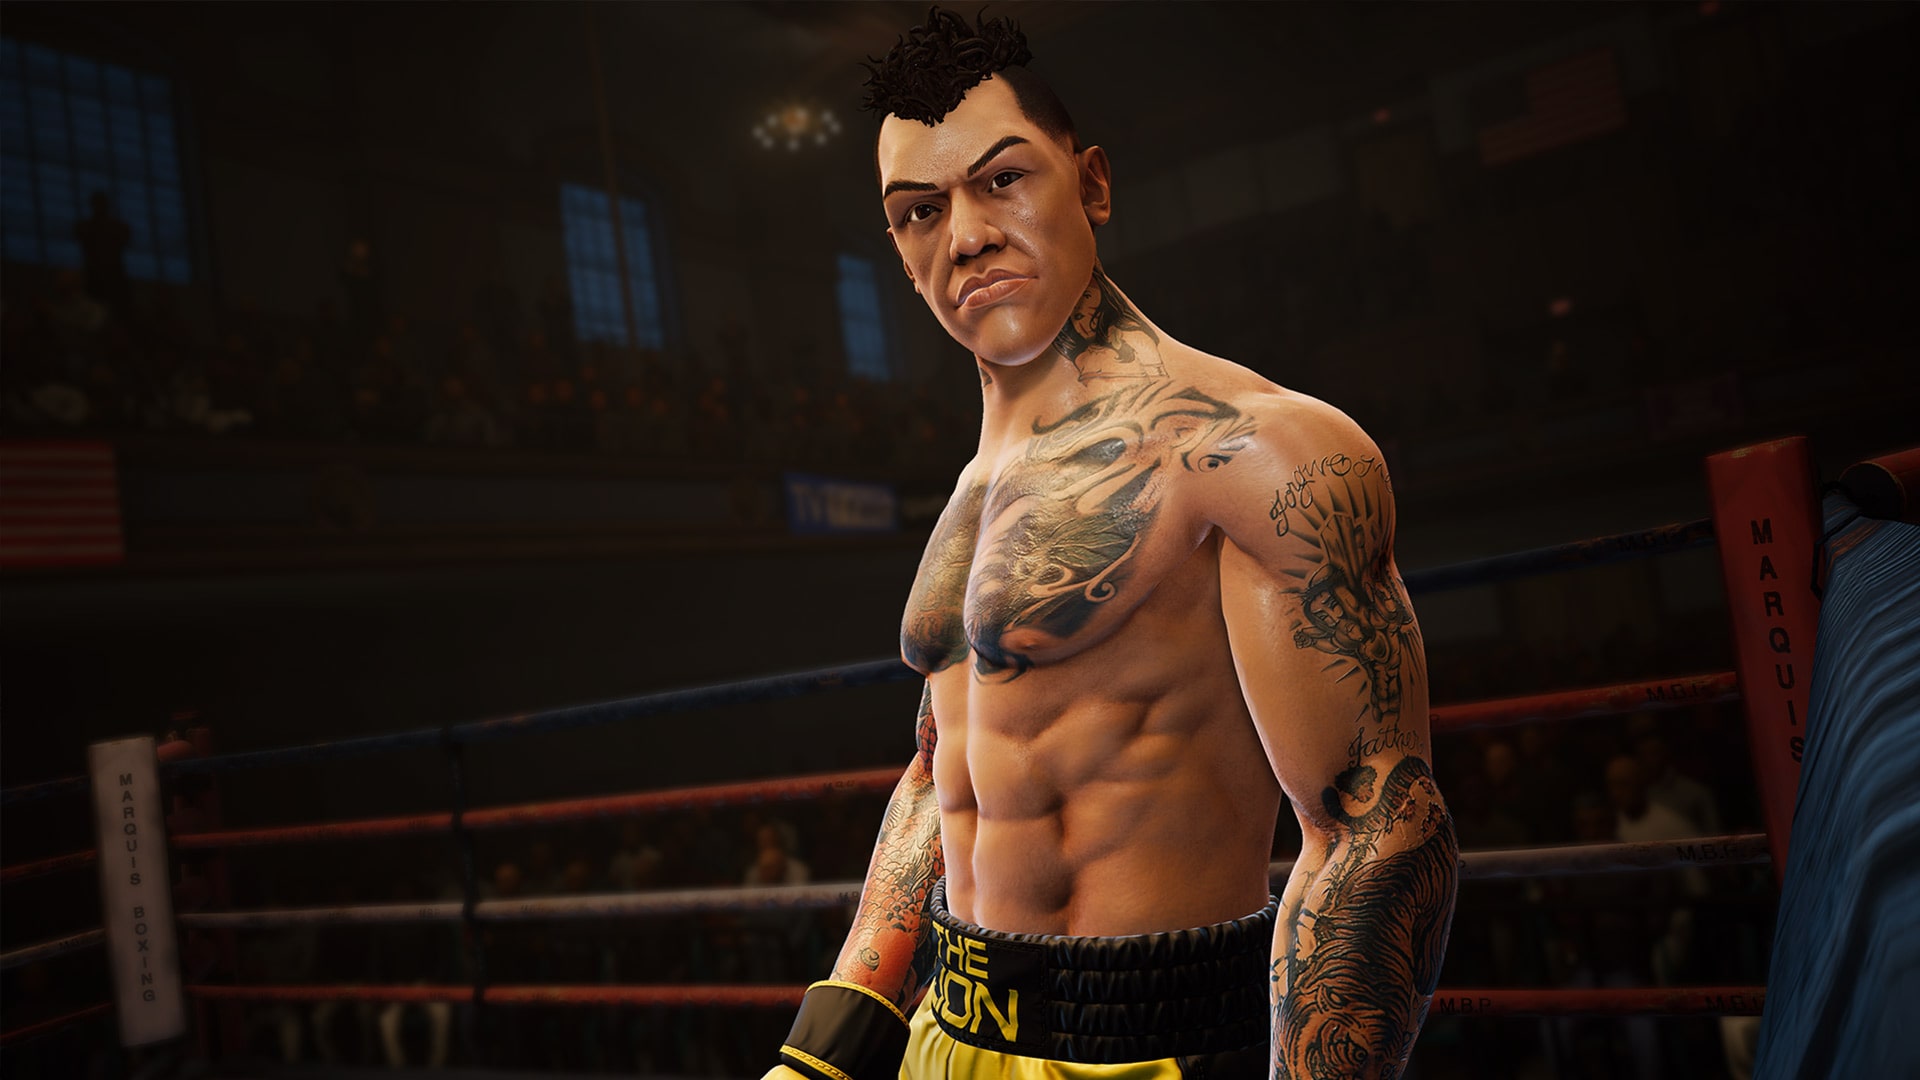 ps4 boxing games vr